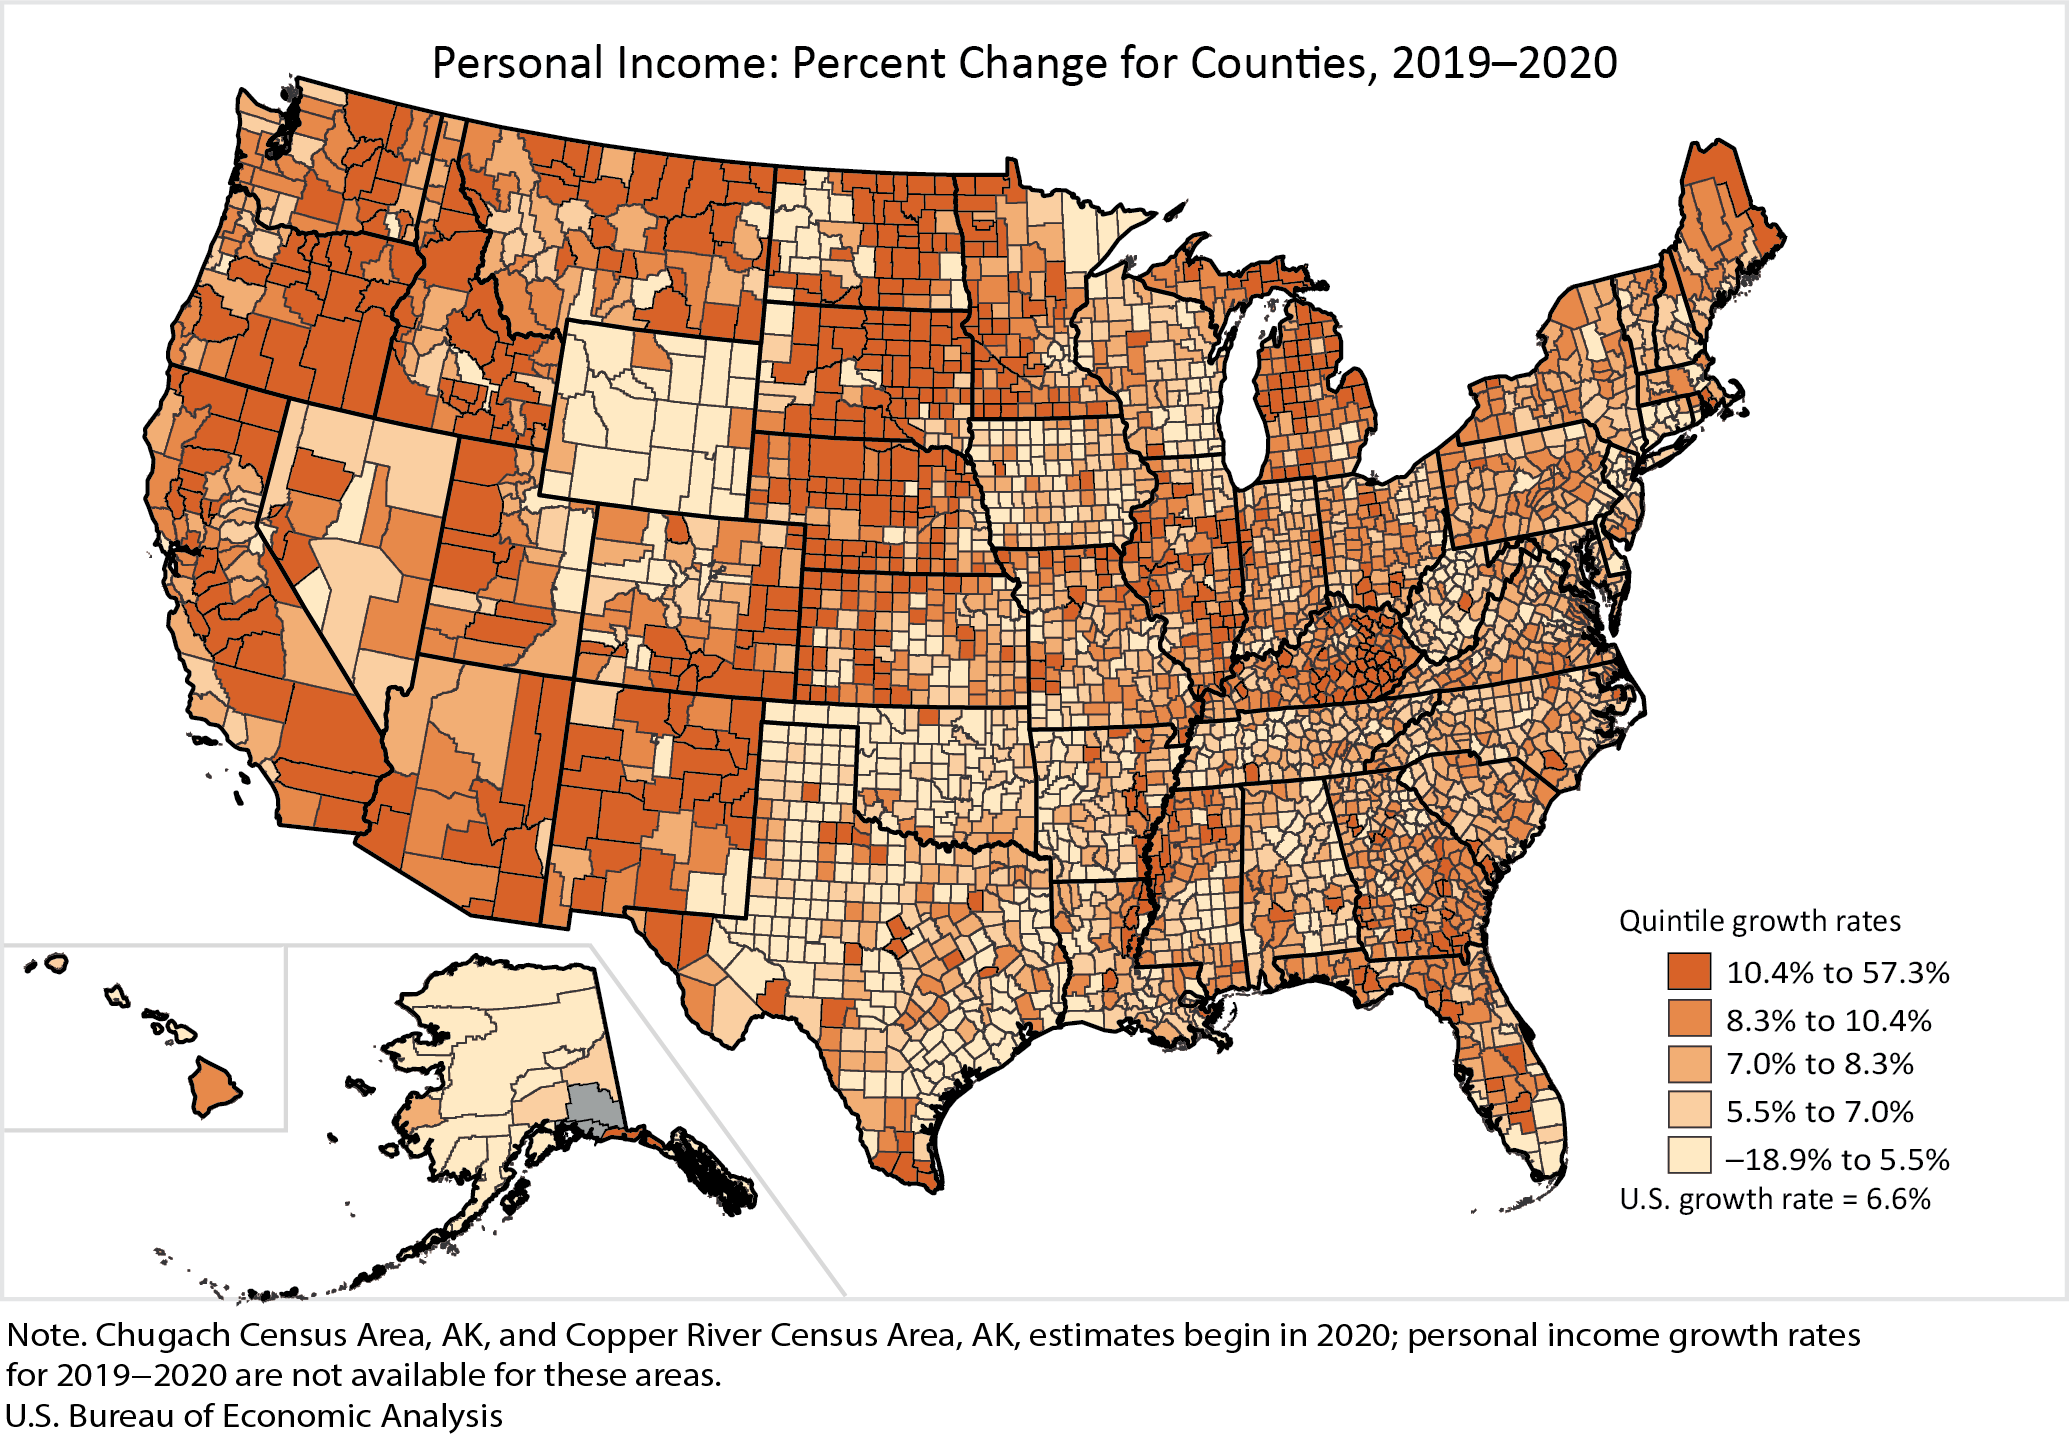 Map: Personal Income: Percent Change for Counties, 2019-2020